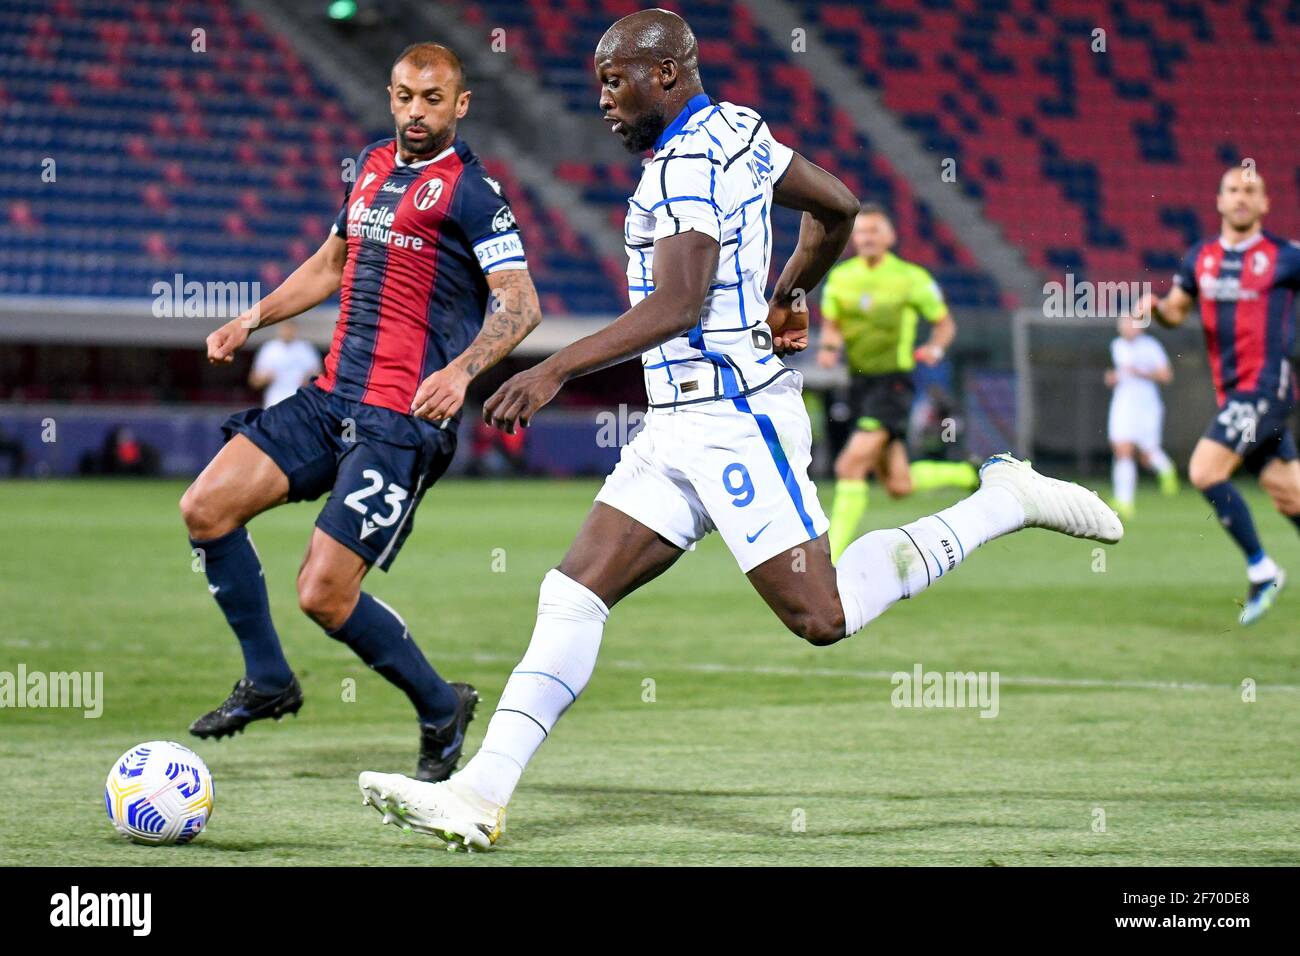 Bologna, Italy. 03rd Apr, 2021. Romelu Lukaku of Internazionale in action1 during Bologna FC vs Inter - FC Internazionale, Italian football Serie A match in Bologna, Italy, April 03 2021 Credit: Independent Photo Agency/Alamy Live News Stock Photo